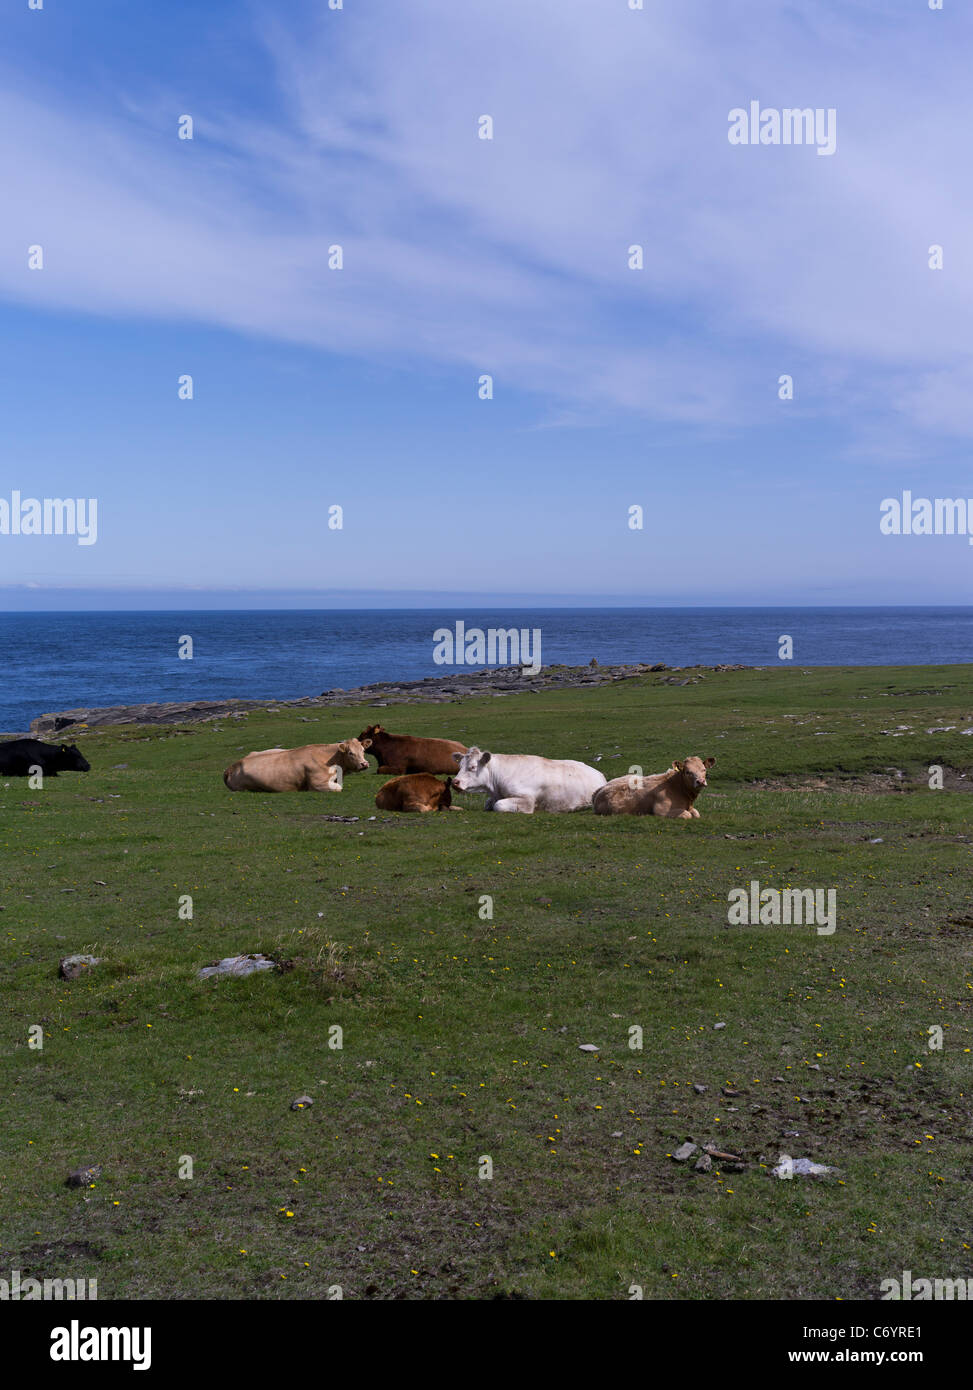 dh Mull Head PAPA WESTRAY ISLAND ORKNEY SCOTLAND Cattle sitting grassland pasture livestock herd beef uk cows sit down Stock Photo